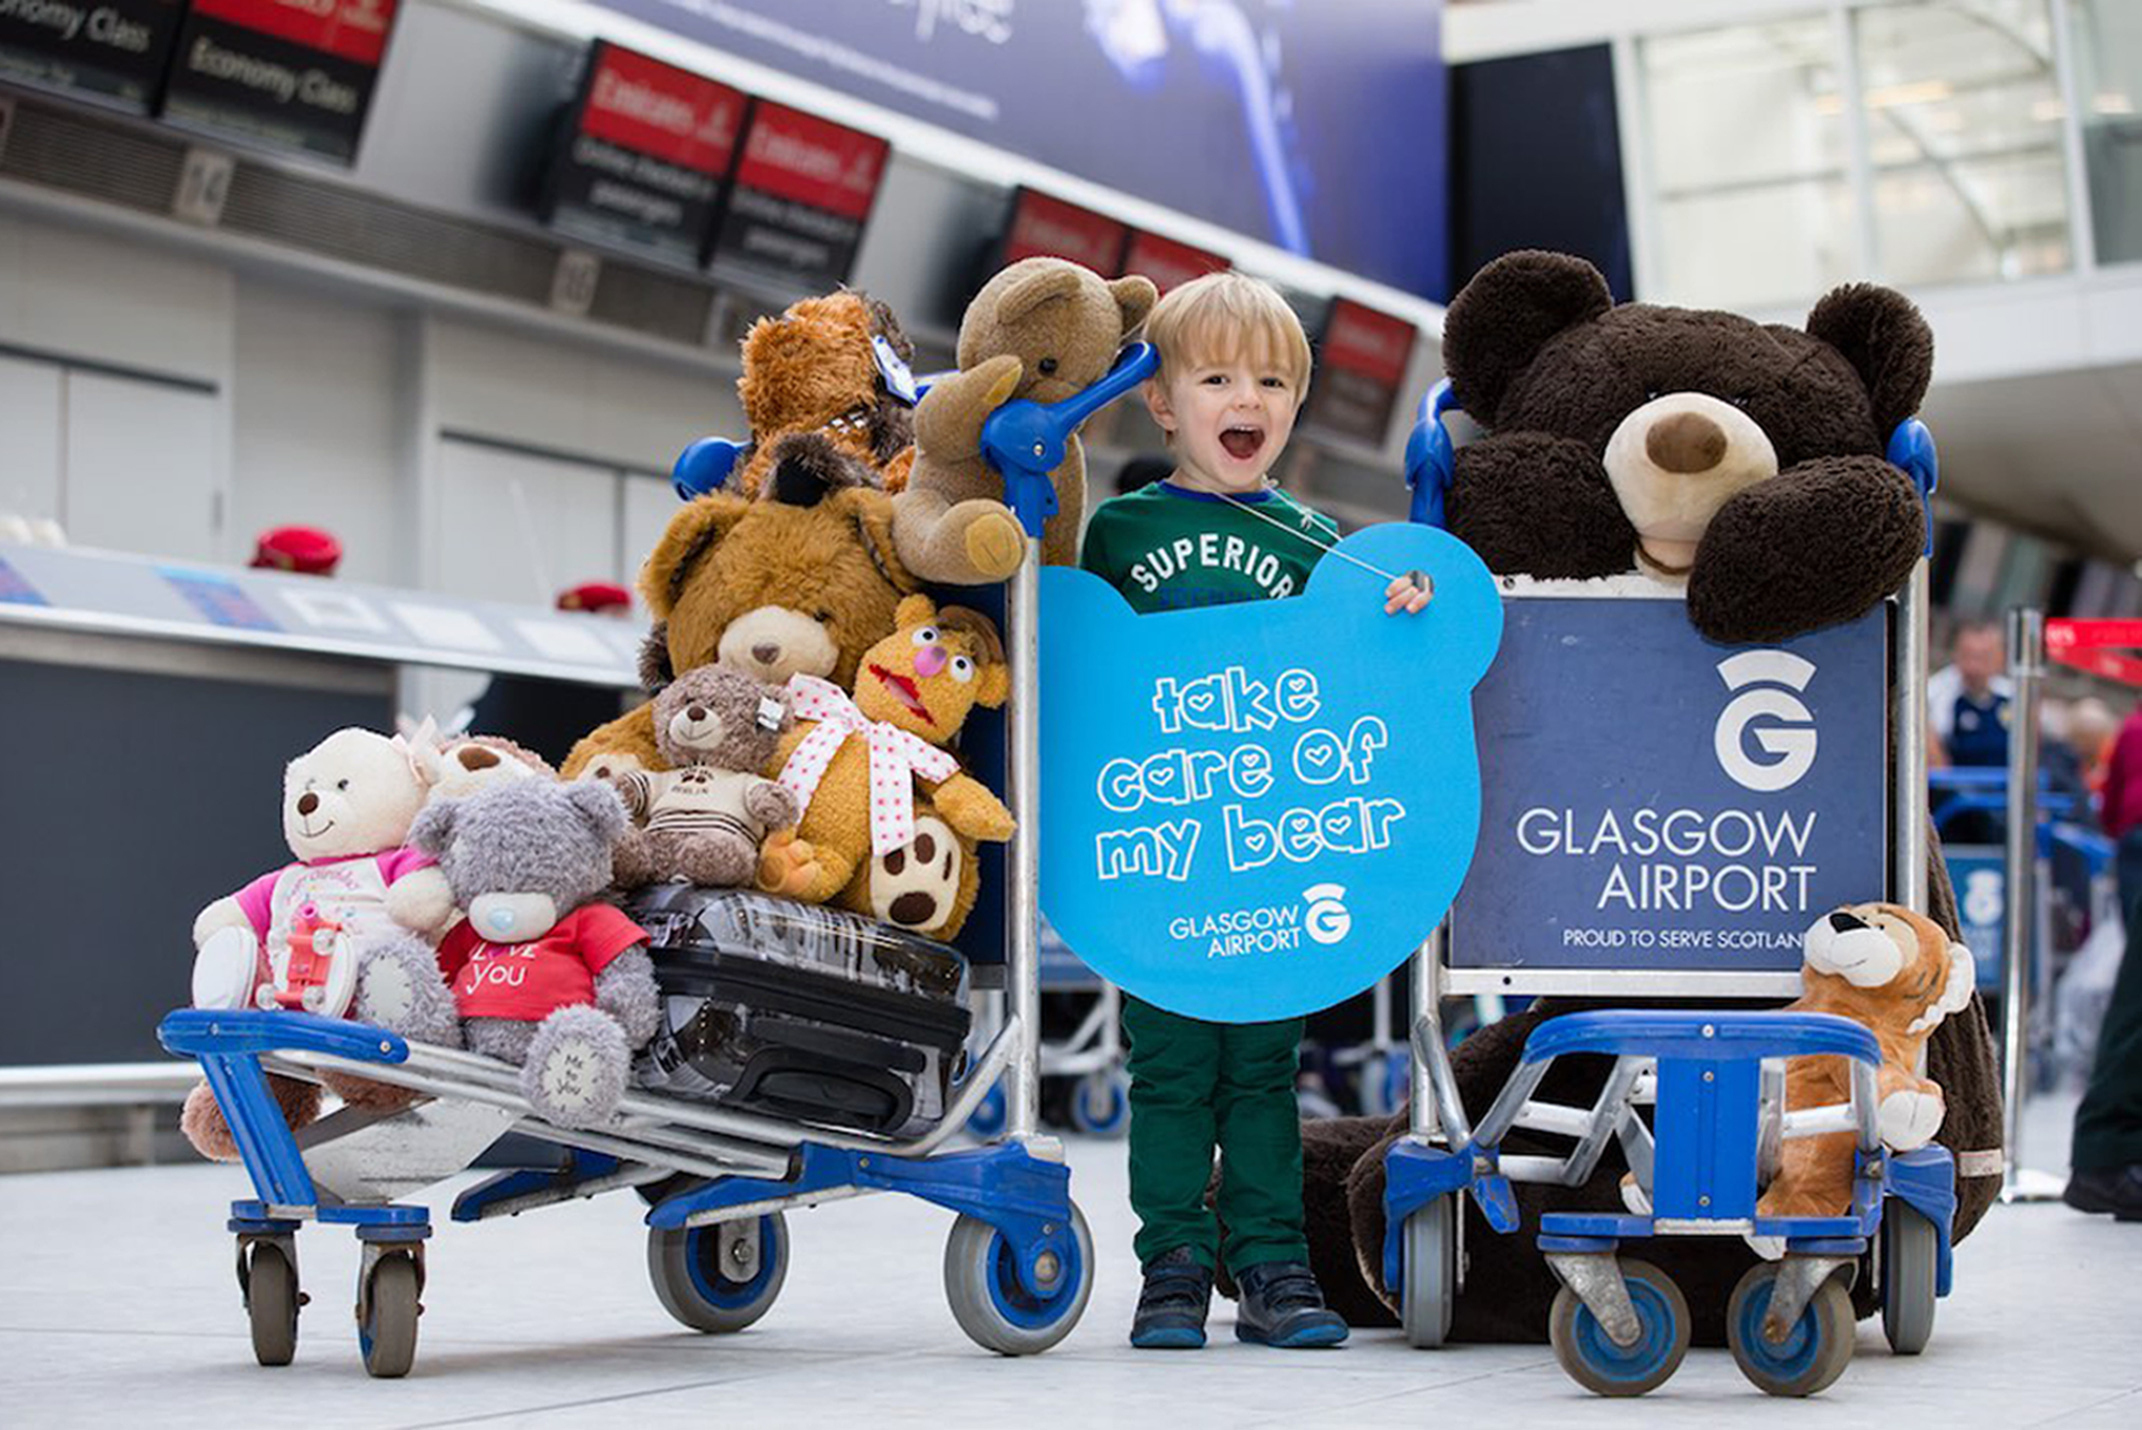 Glasgow Airport want to reunite young passengers with hundreds of teddies left behind on their travels (Martin Shields/Glasgow Airport/PA Wire)